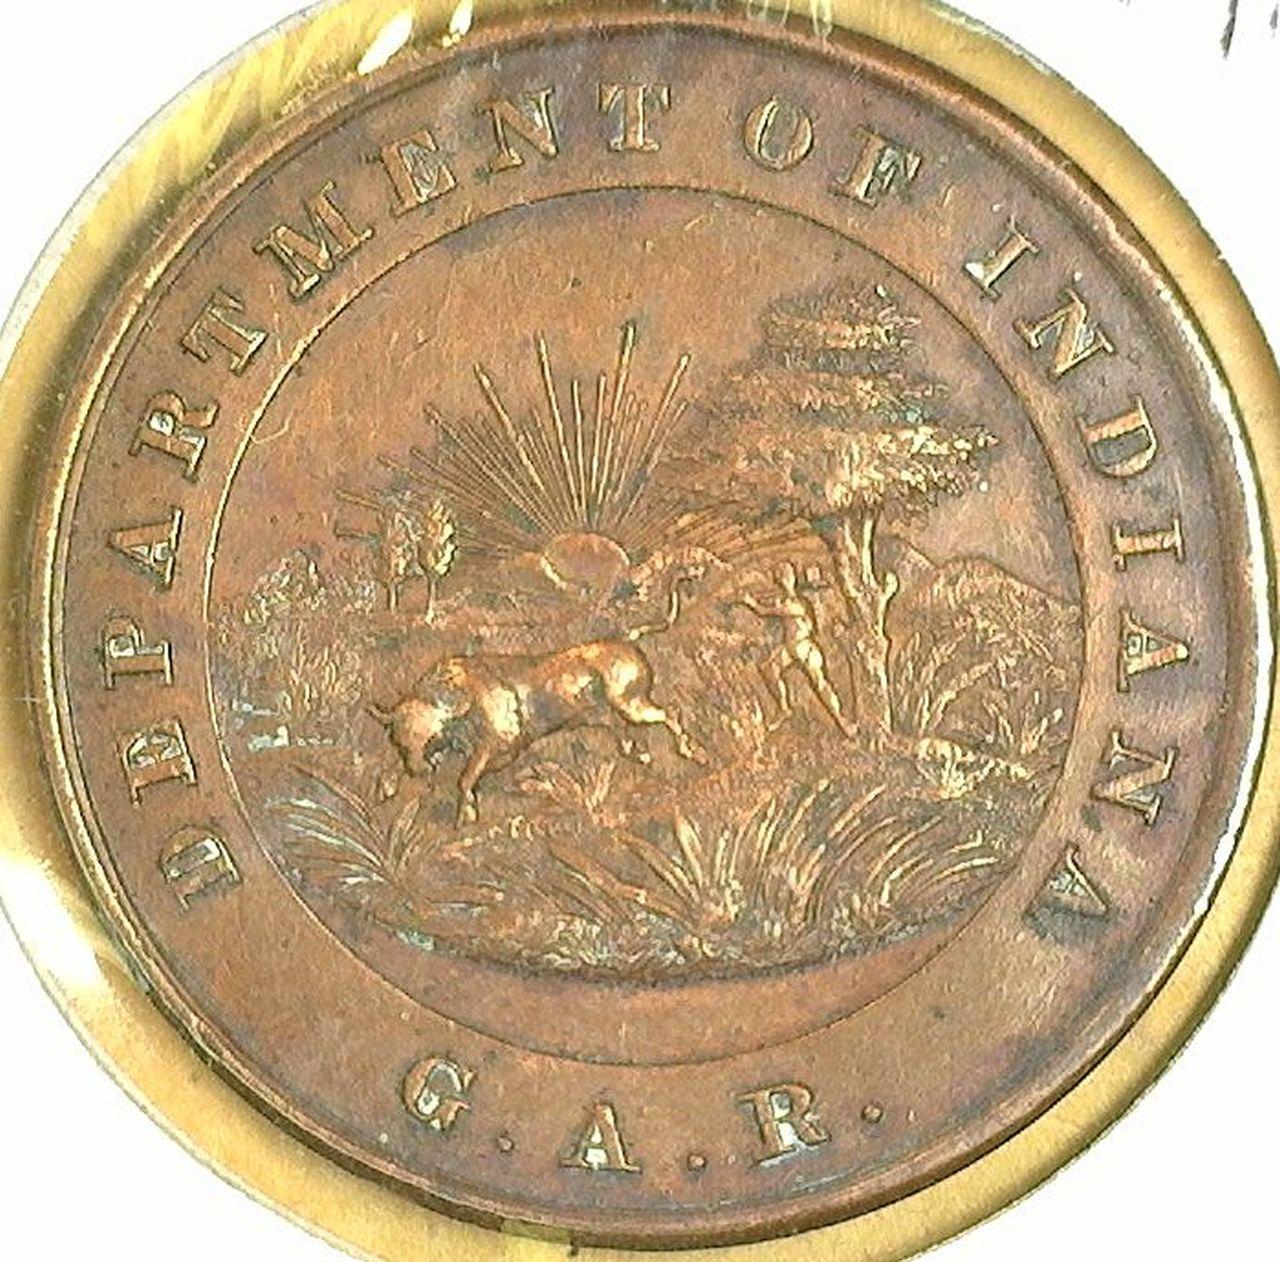 G.A.R. Department of Indiana Bronze Medal.